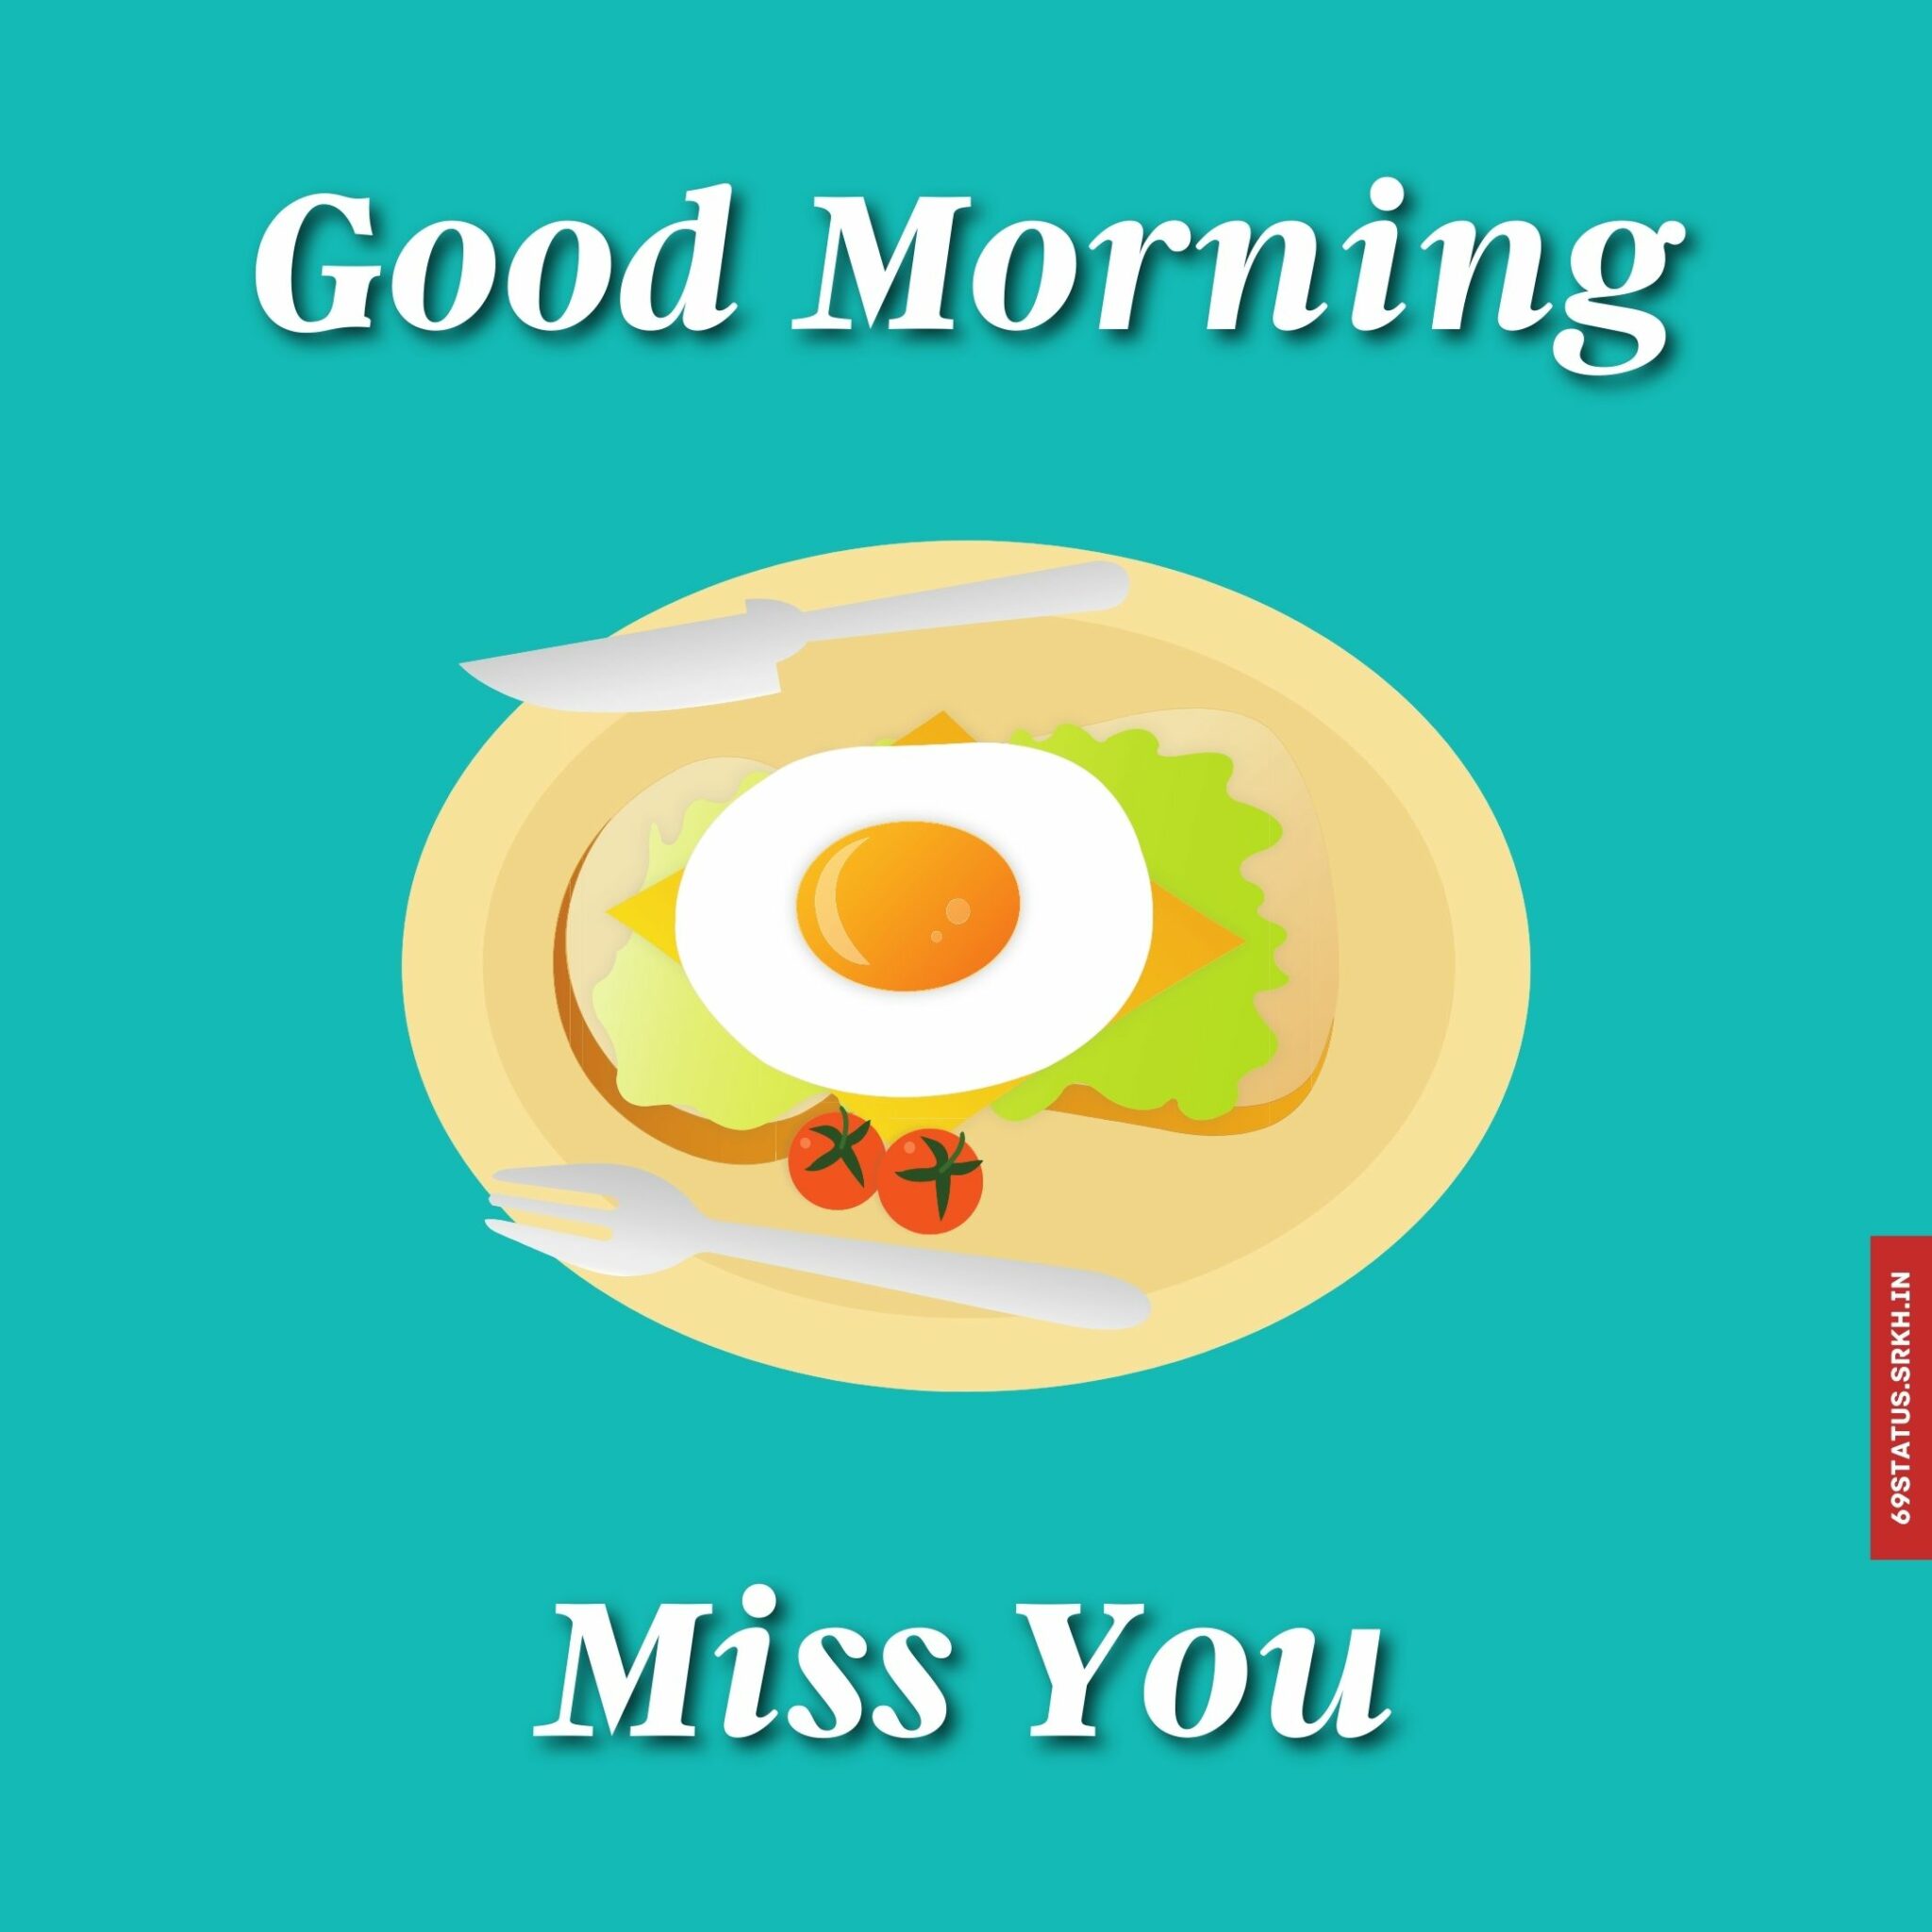 Good morning miss you images